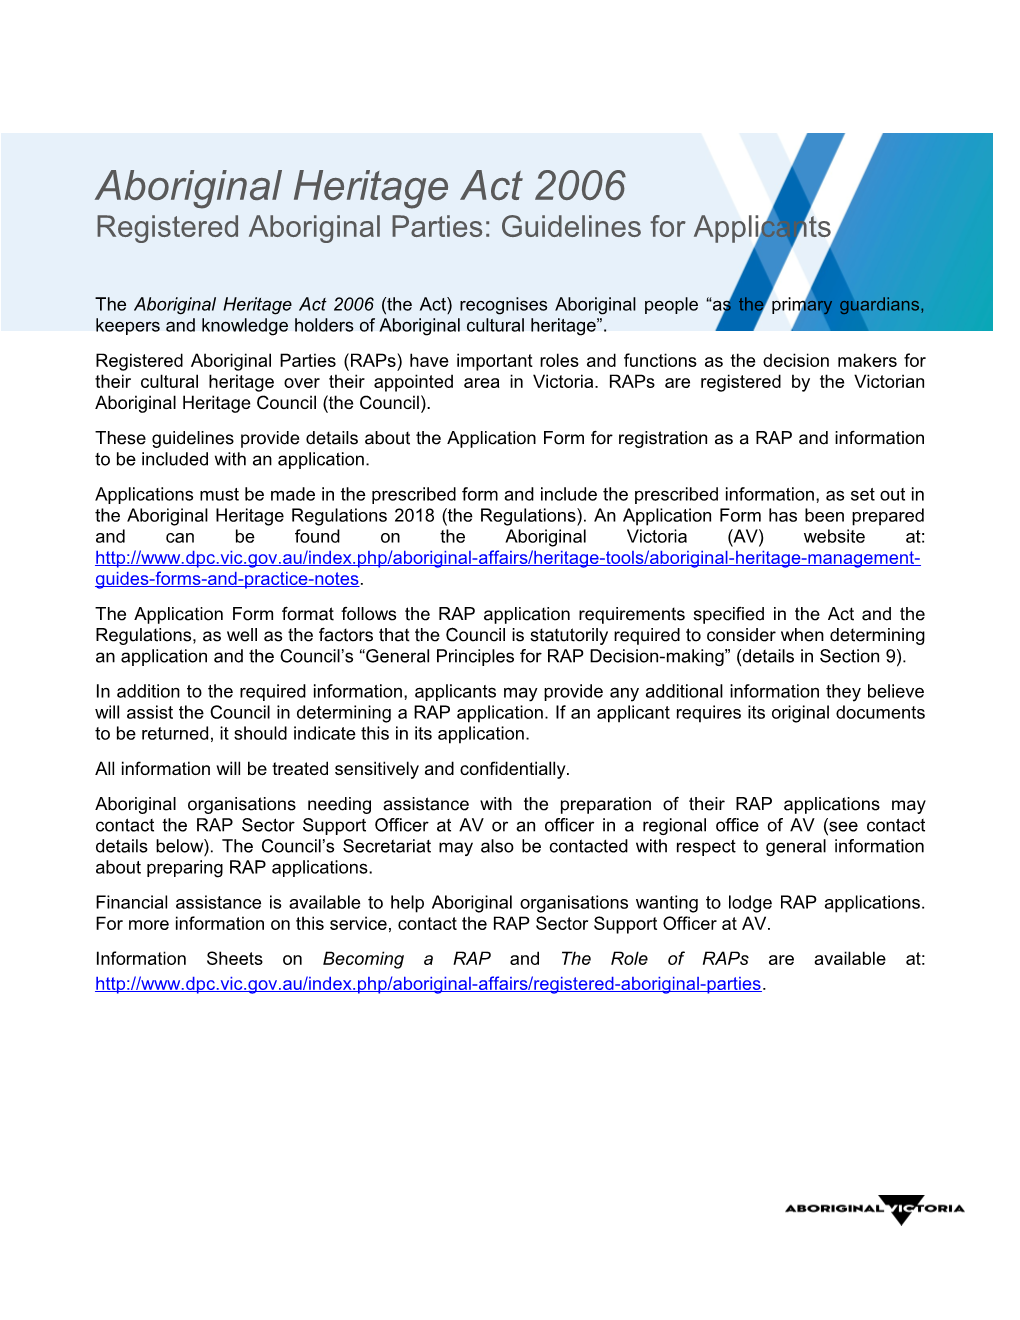 The Aboriginal Heritage Act 2006 (The Act) Recognises Aboriginal People As the Primary